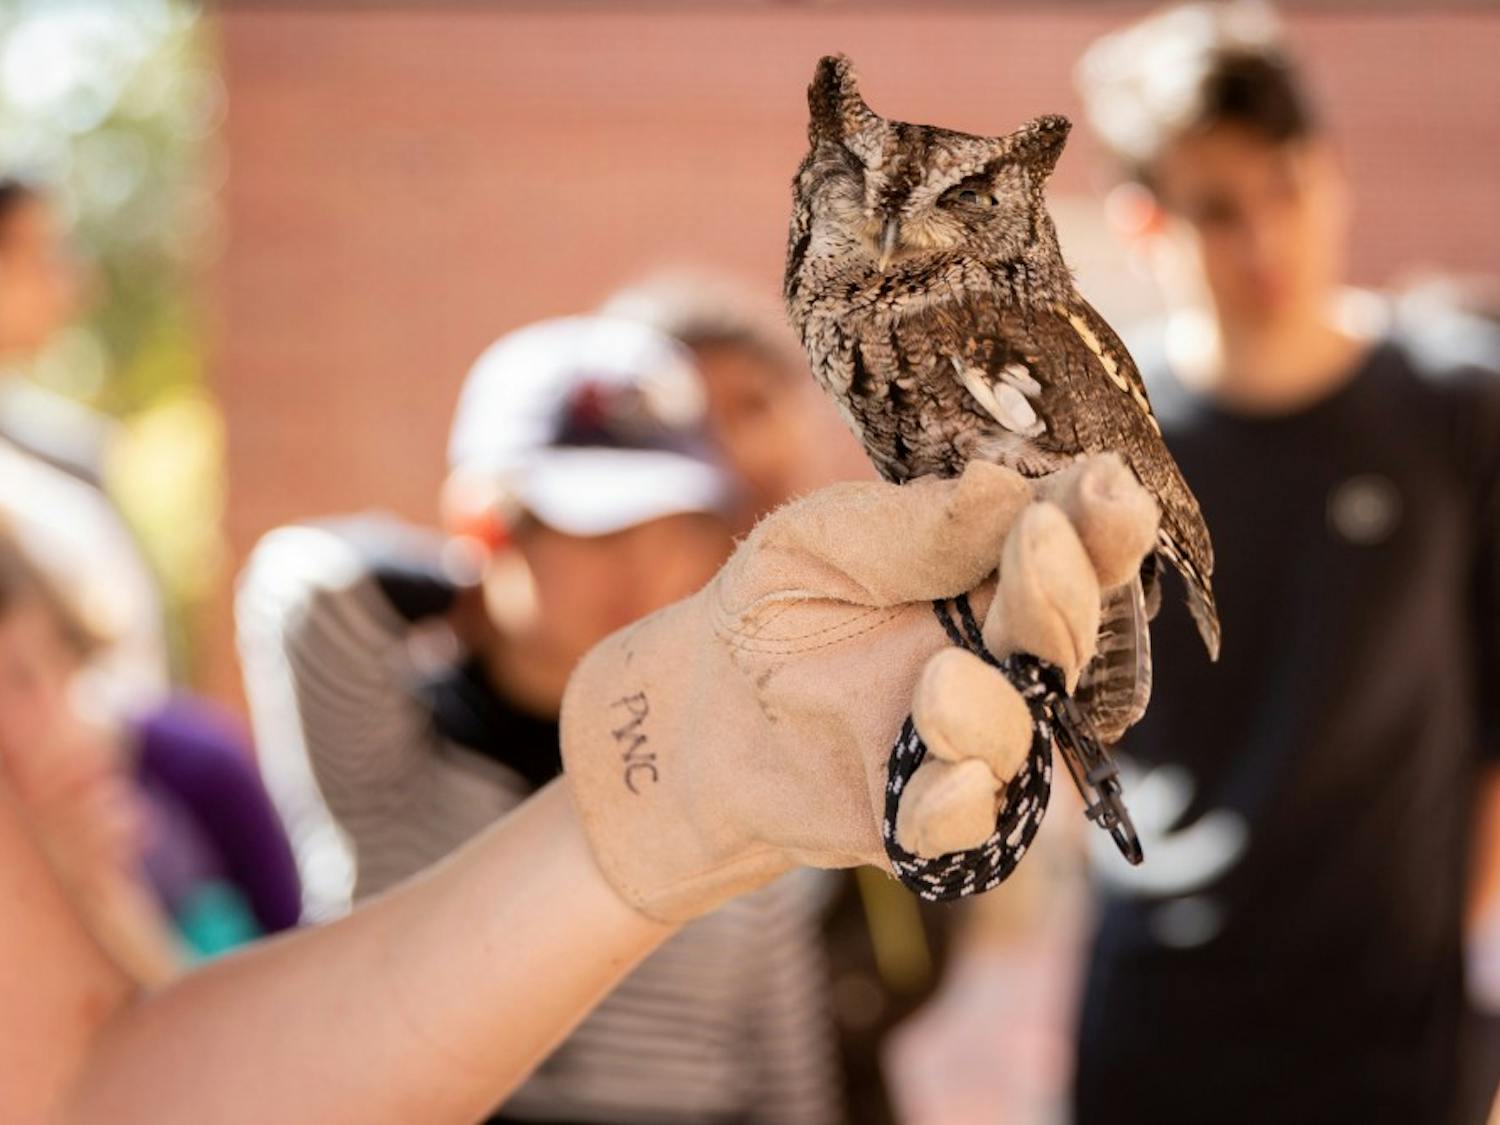 Adam Prince, an environmental educator at the Piedmont Wildlife Center, teaches students about Ash, the Eastern Screech-Owl, at a Harry Potter-themed event called Cobbwarts on April 6, 2019. "I mean this is Pigwidgeon," Prince said. "This is the same owl that the Weasleys had."